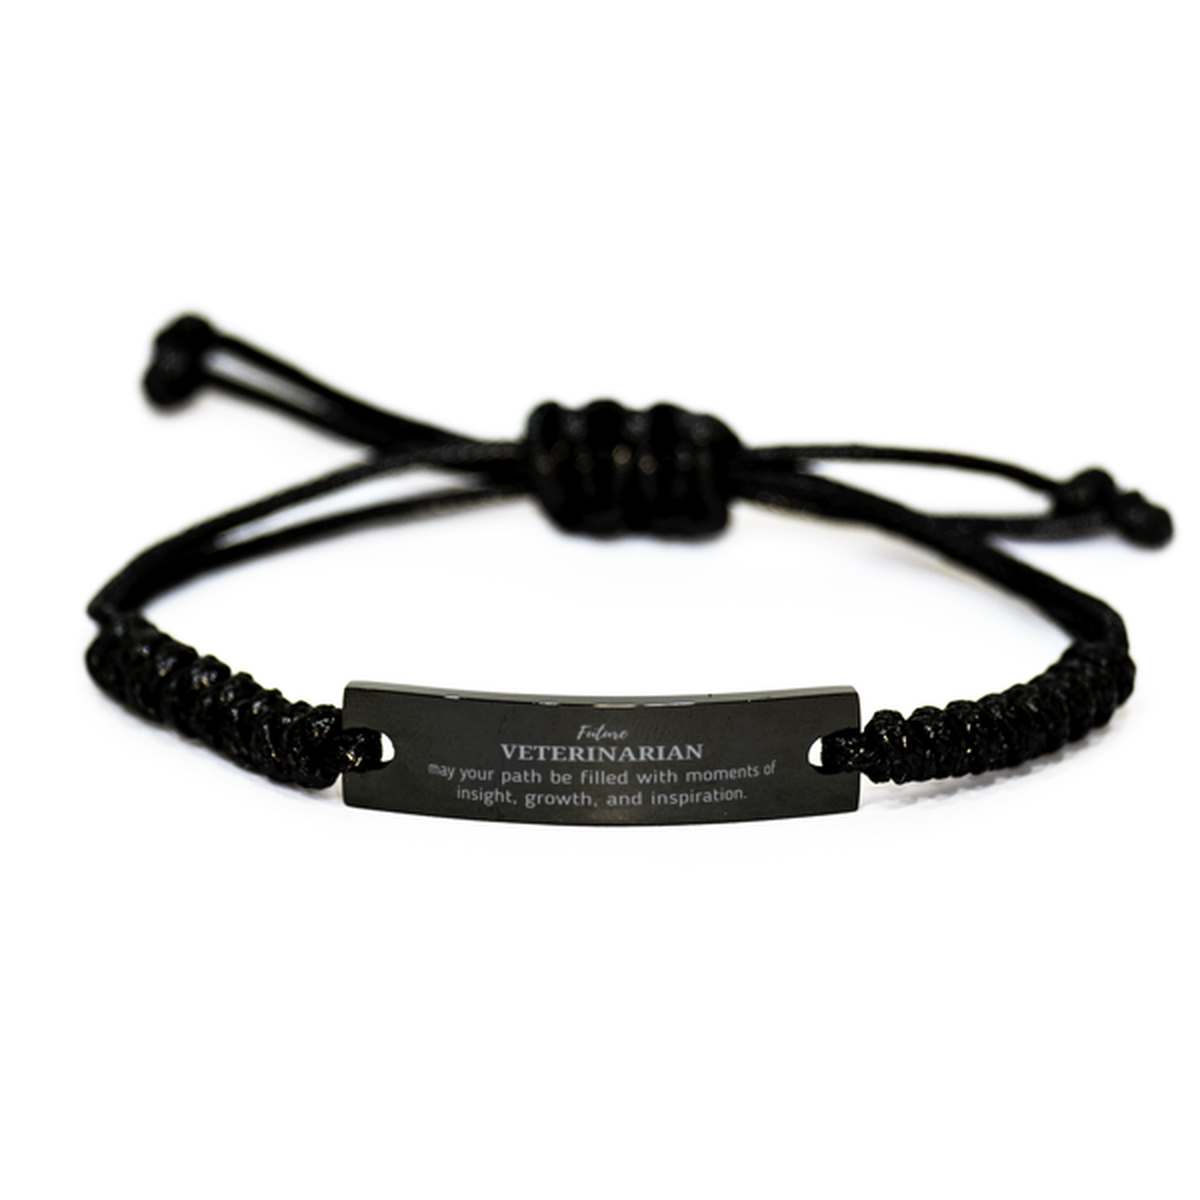 Future Veterinarian Gifts, May your path be filled with moments of insight, Graduation Gifts for New Veterinarian, Christmas Unique Black Rope Bracelet For Men, Women, Friends